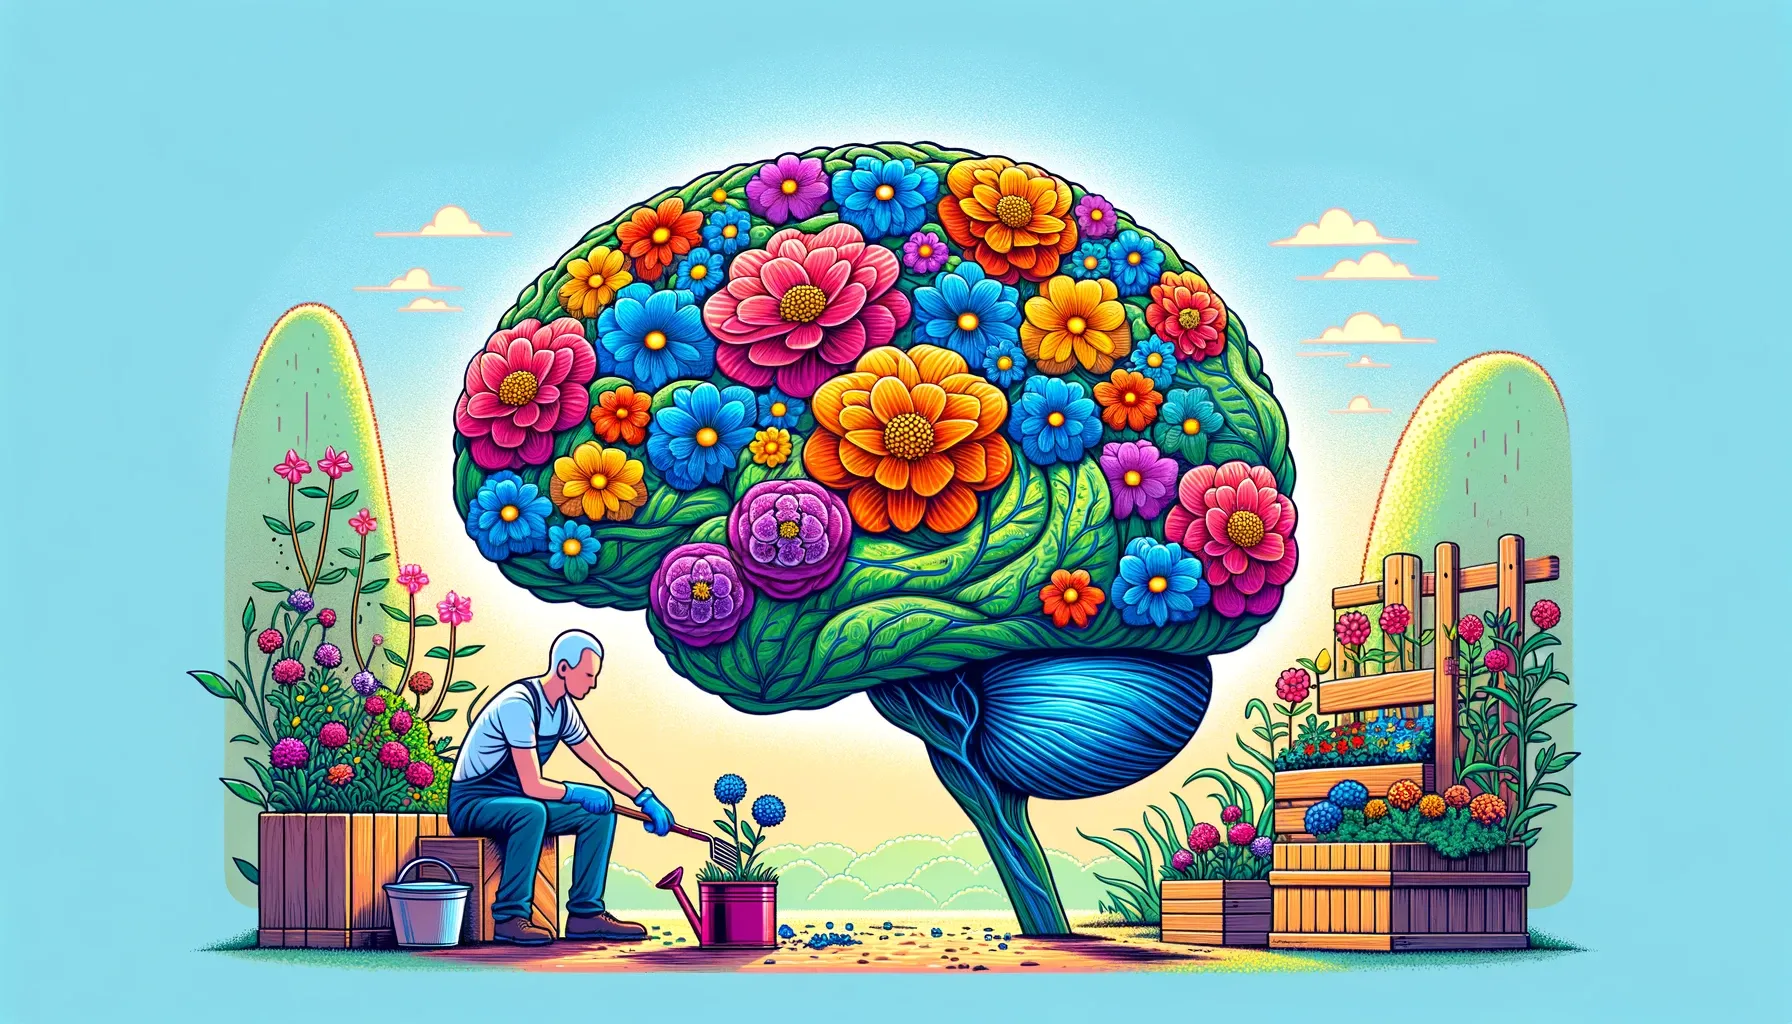 Wide illustration: A picturesque brain garden in full bloom. Vibrant flowers, representing neural sparks and cognitive abilities, flourish under the care of a gardener (symbolizing coloring). In a corner, the gardener diligently removes weeds, symbolizing cognitive inflammation.